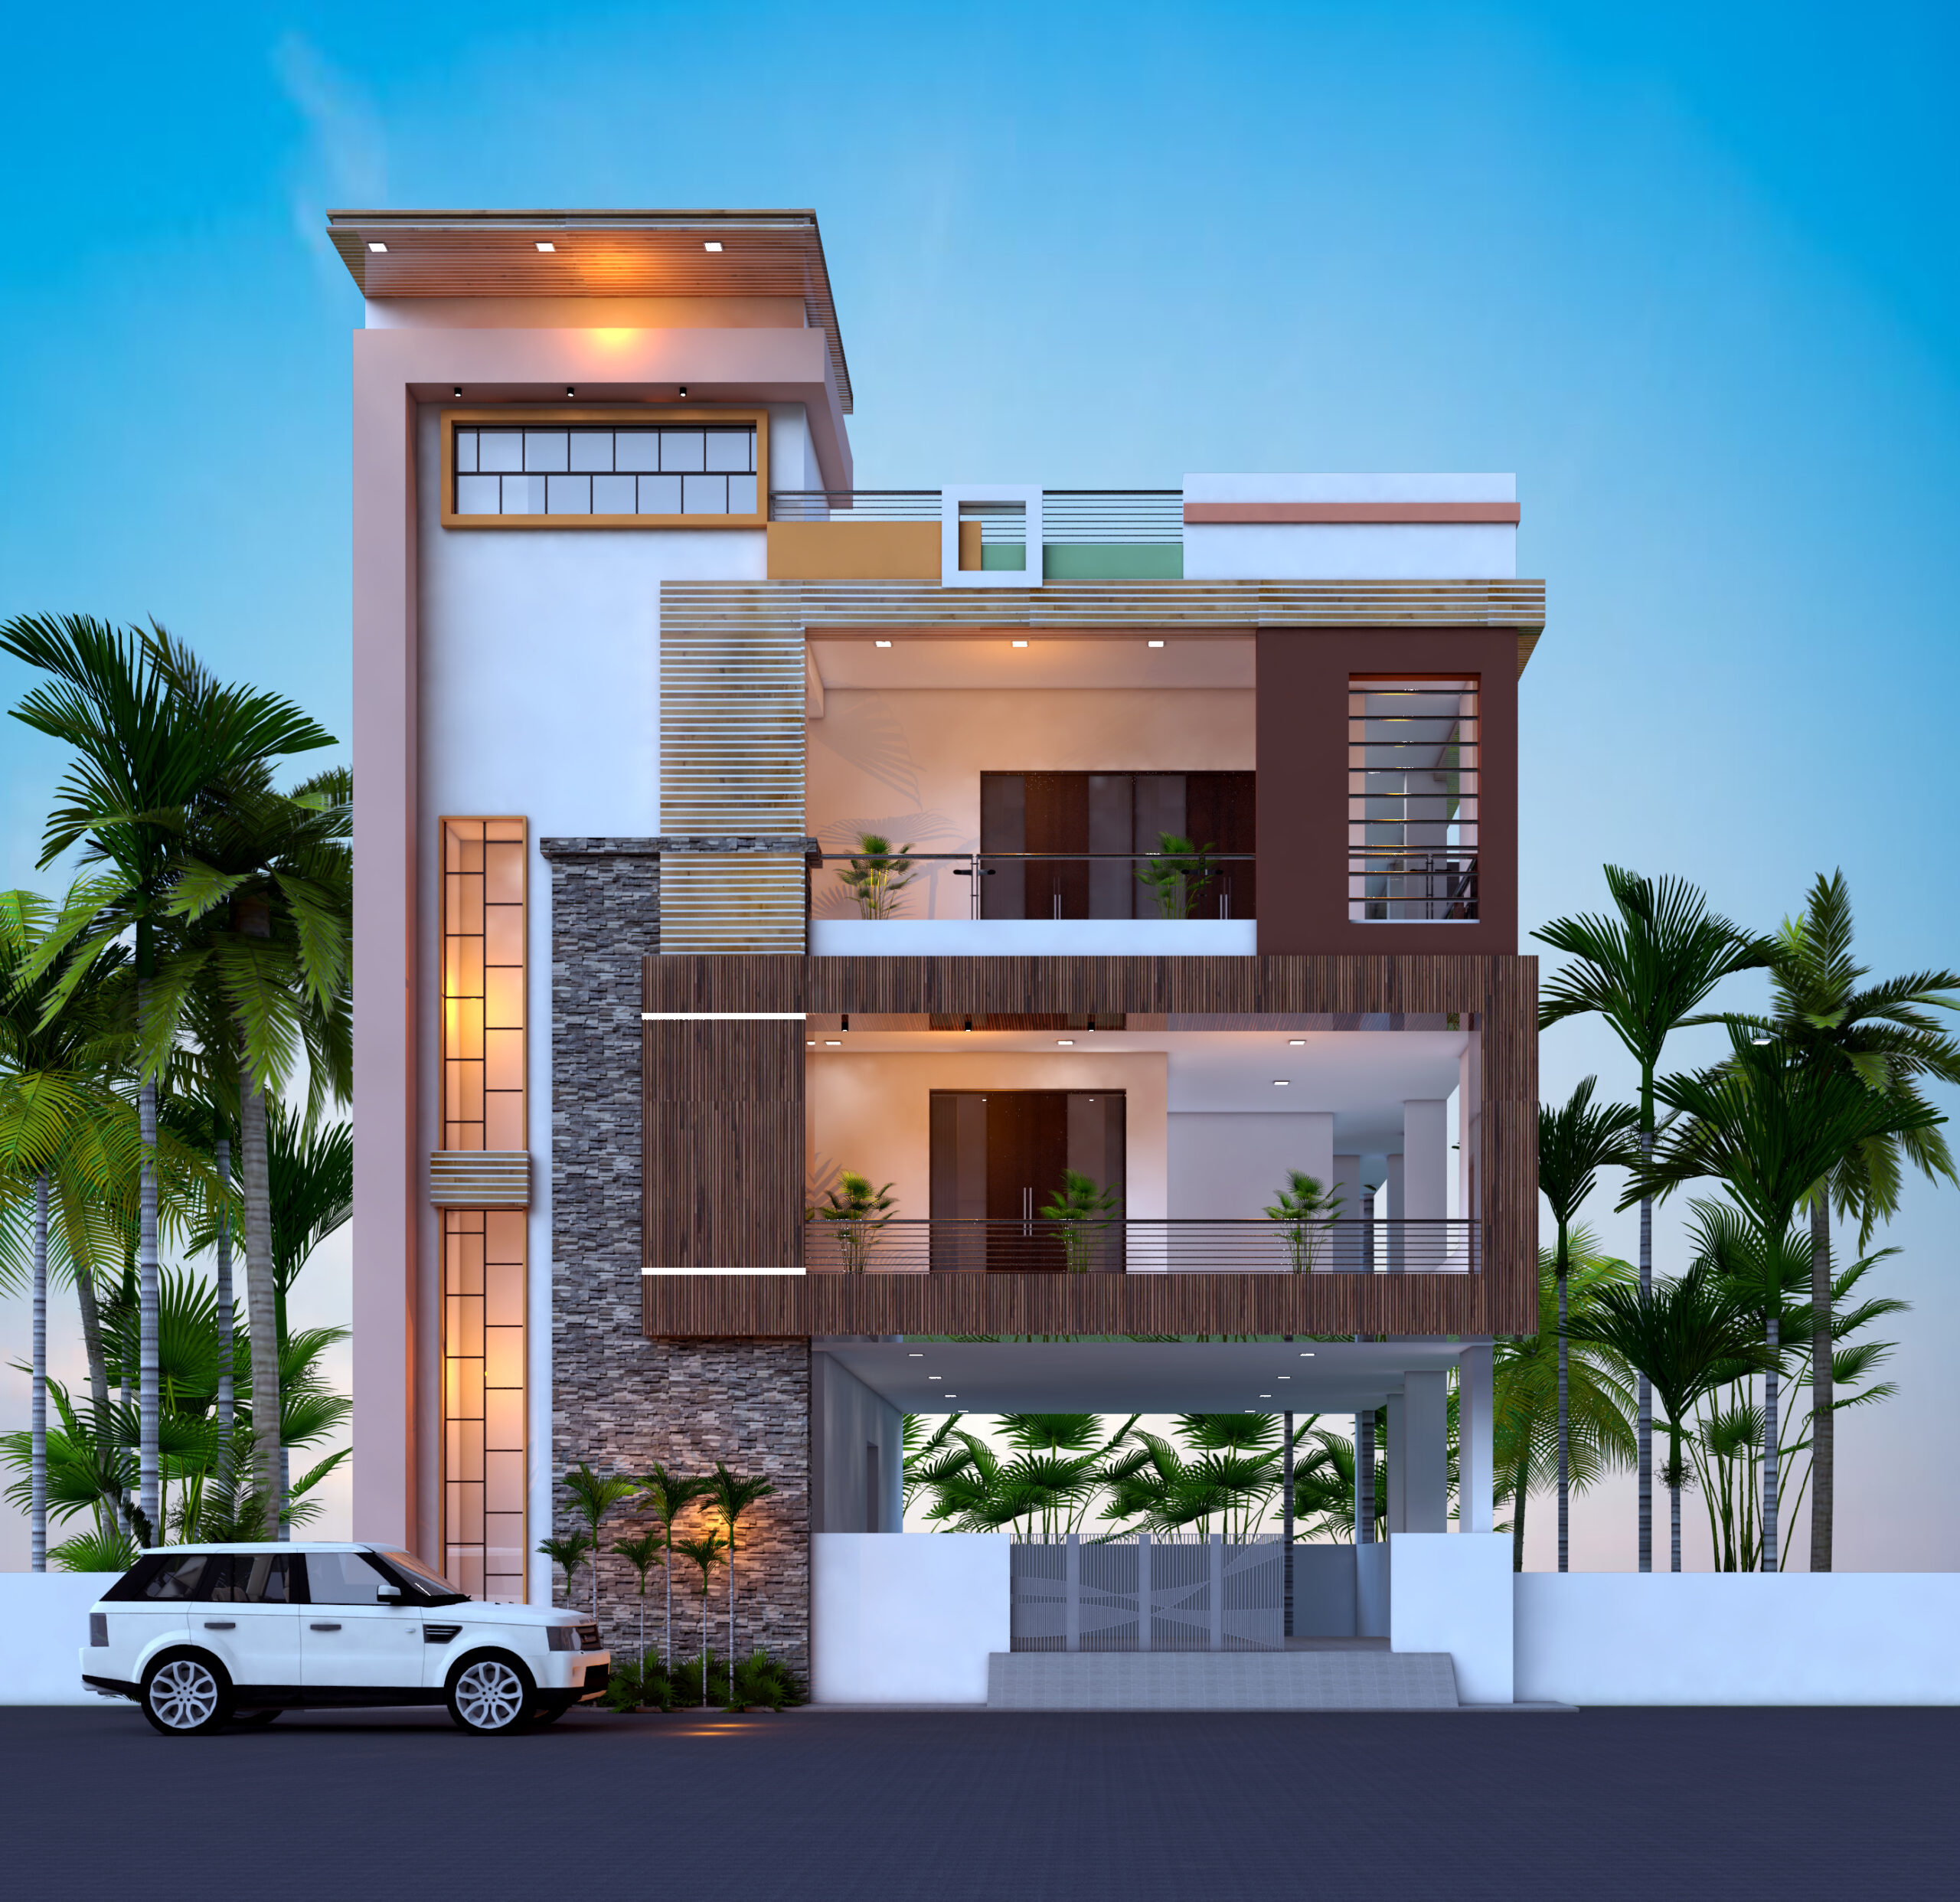 House Front Elevation Designs For Double Floor East Facing Home Alqu